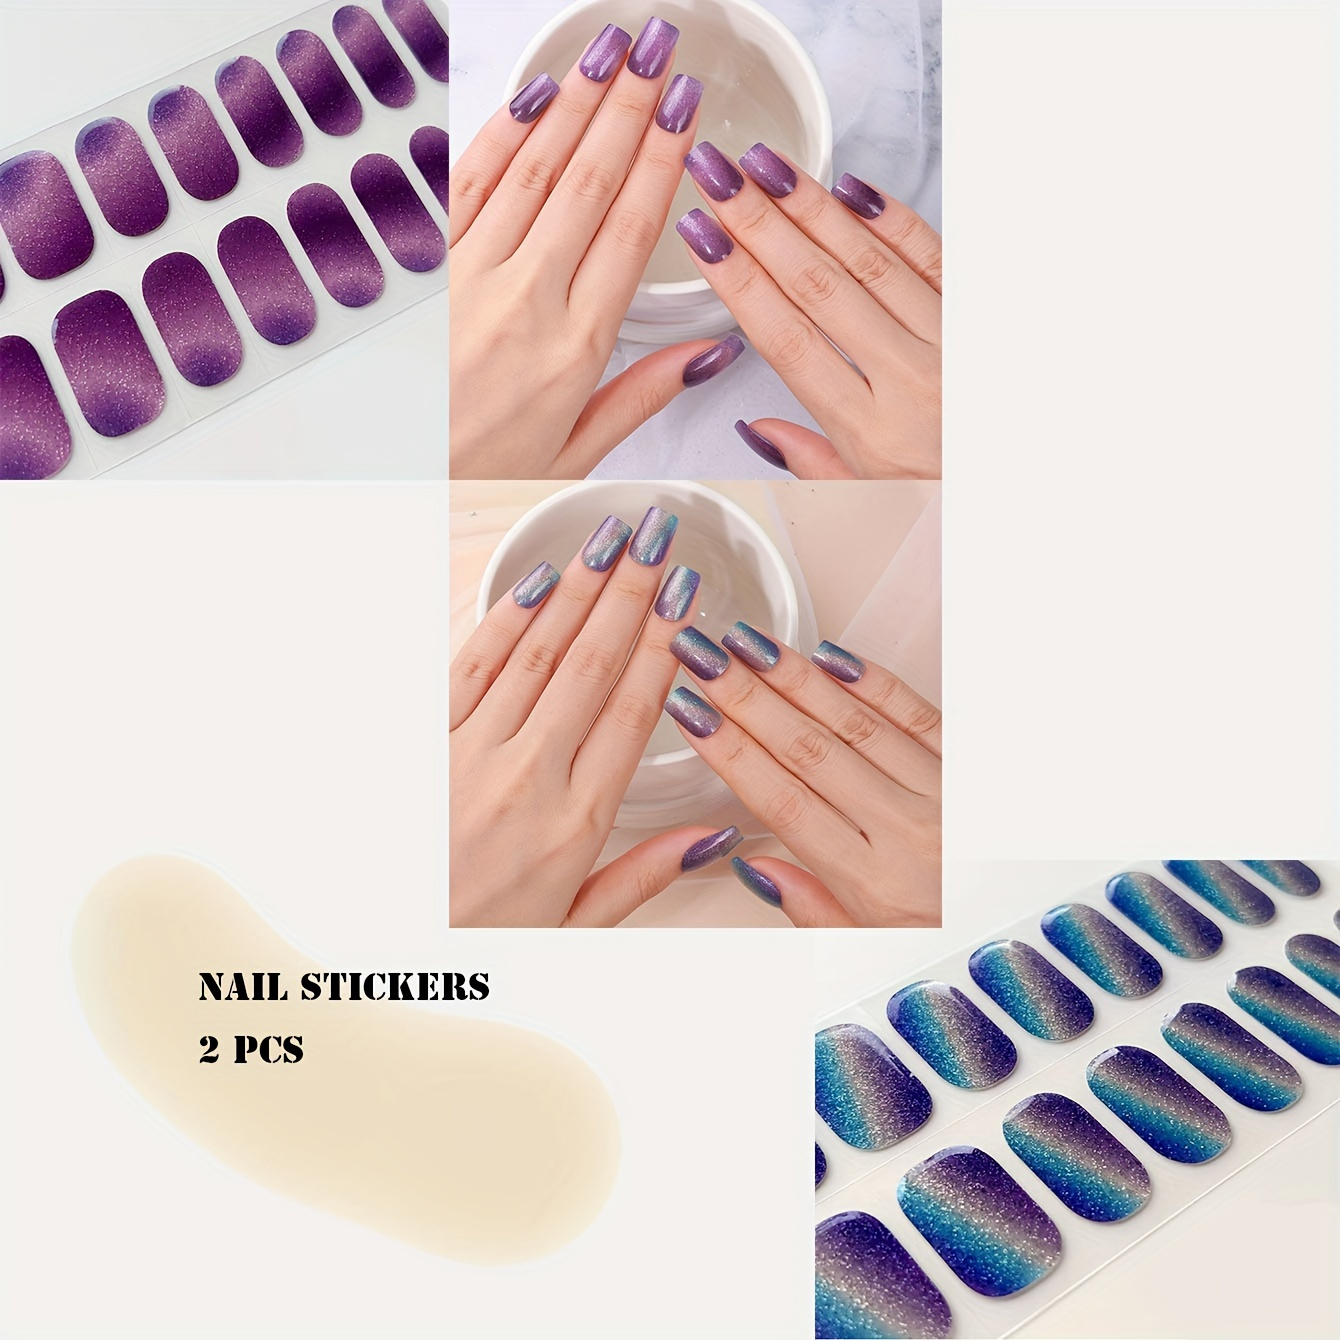 

2 Box Semi Cured Gel Nail Wraps, Cat's Eye Aurora Semi-cured Gel Nail Strips-works With Any Nail Lamps, Salon-quality,long Lasting,easy To Apply & Remove-includes Nail File & Wooden Stick